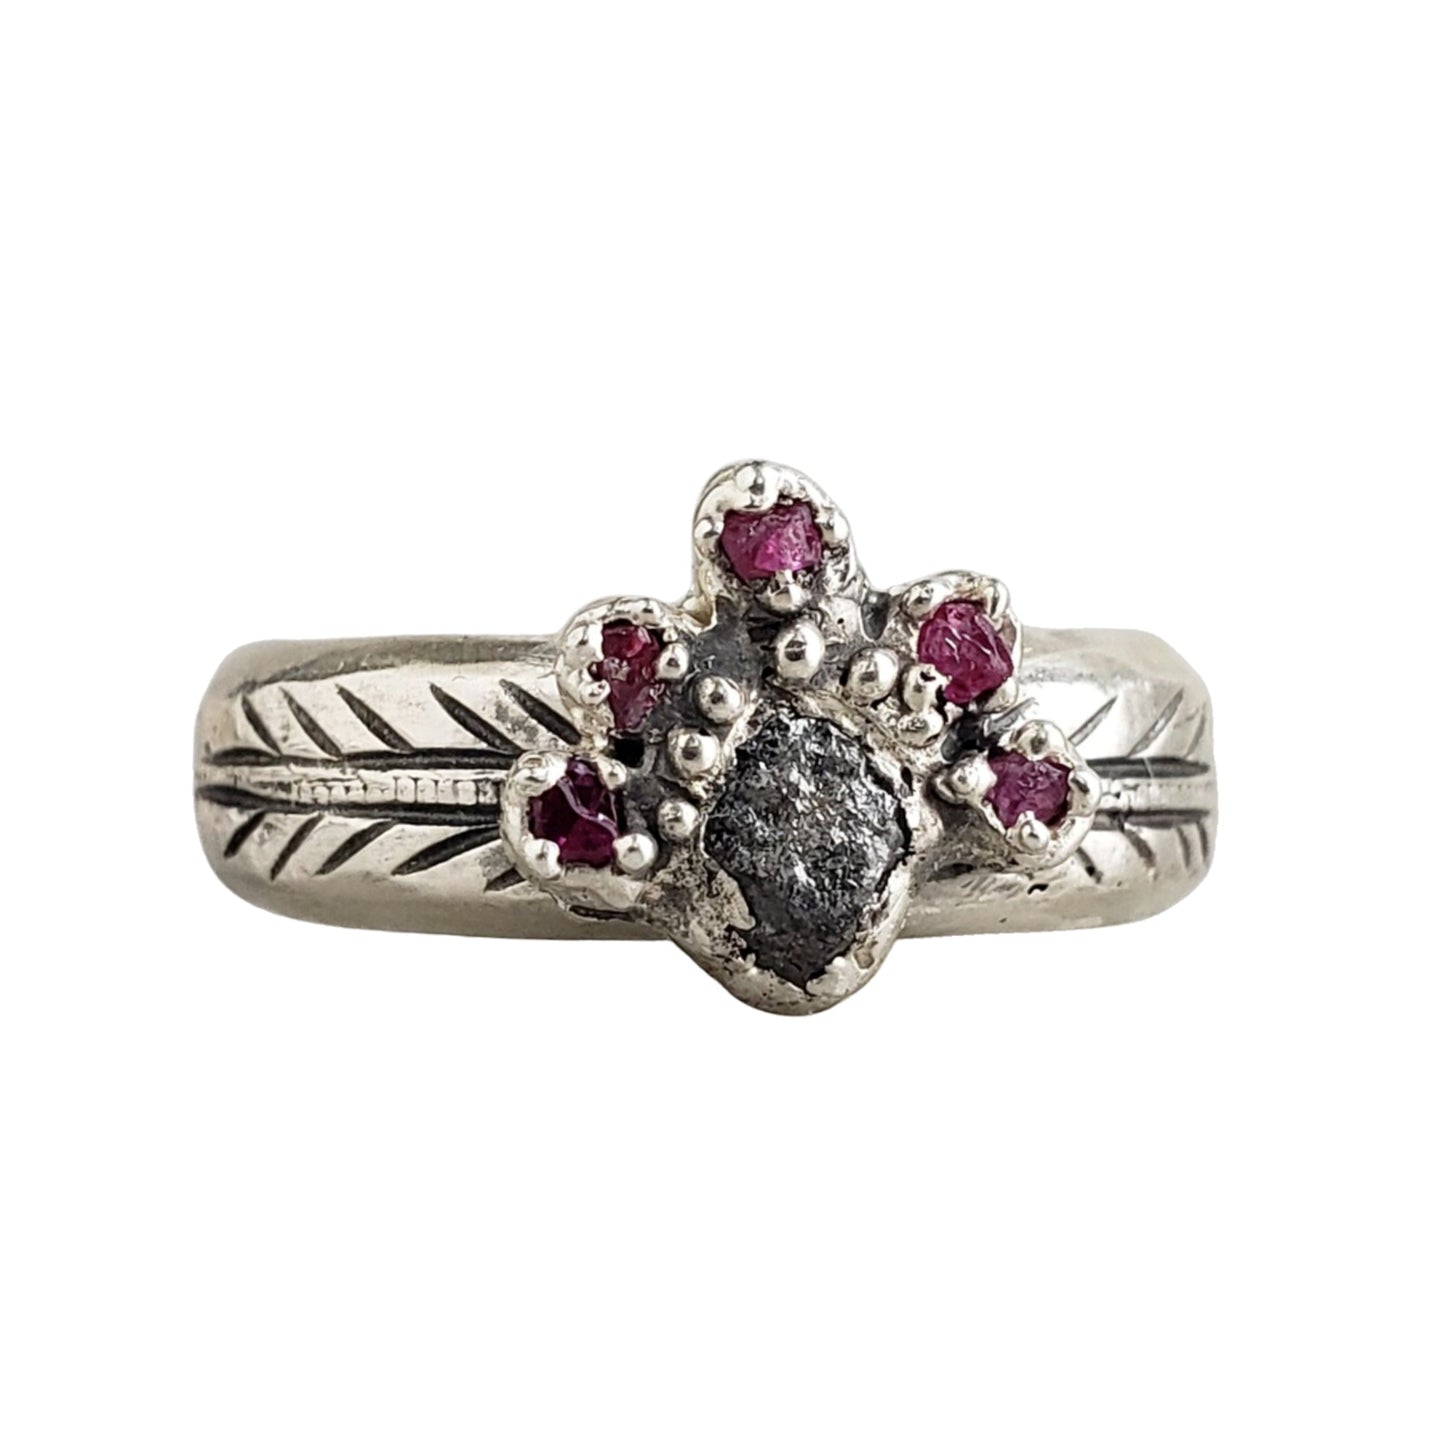 Ruby Peacock Ring -  Rough Ruby and Diamond, Silver